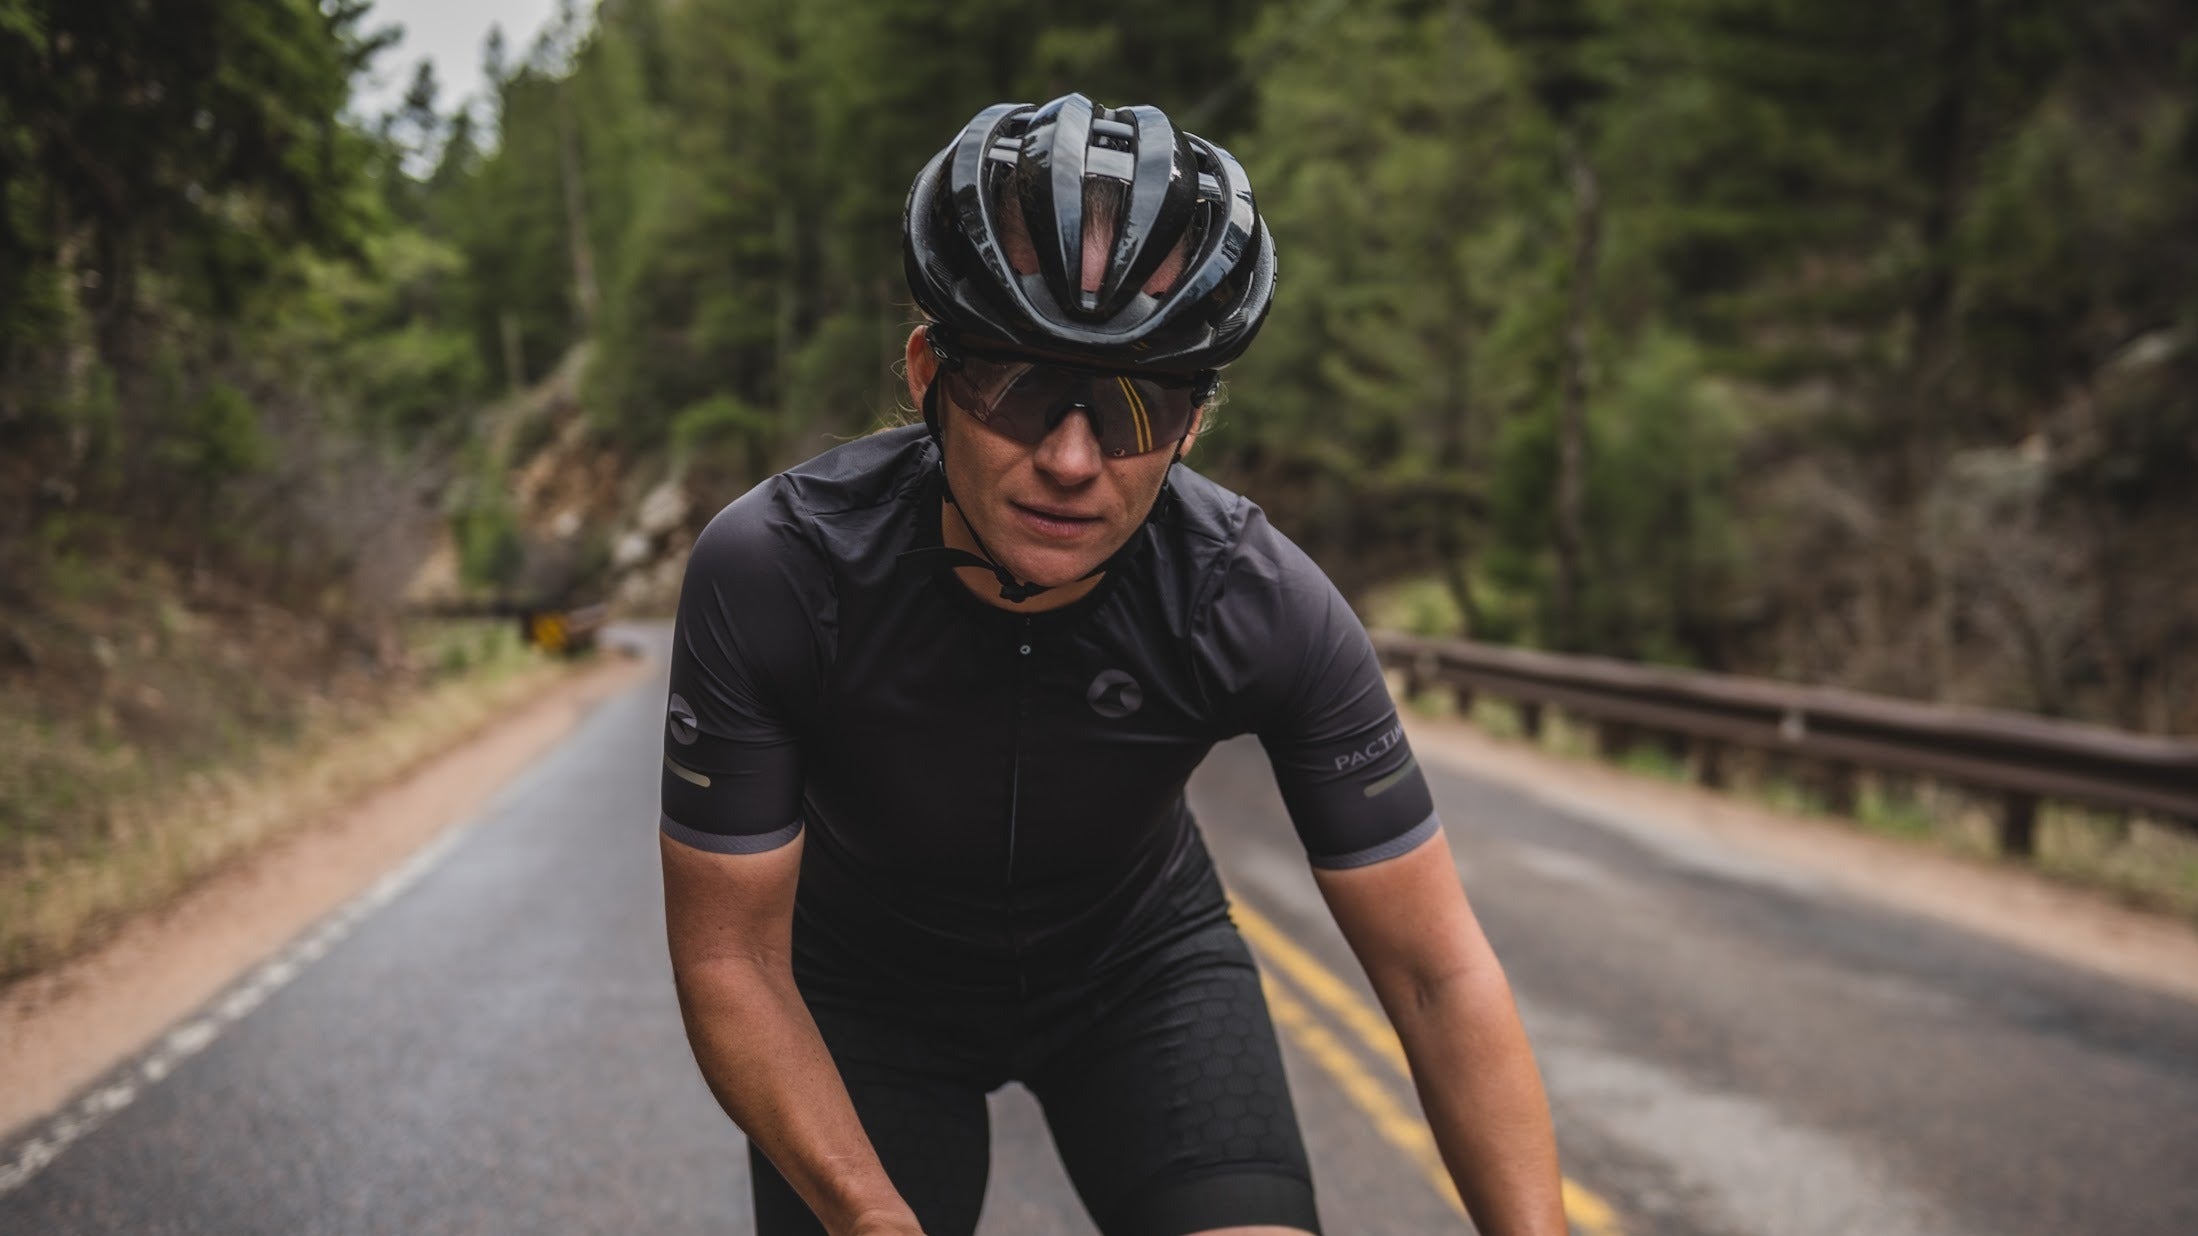 Women's Summer Cycling Clothing from Pactimo